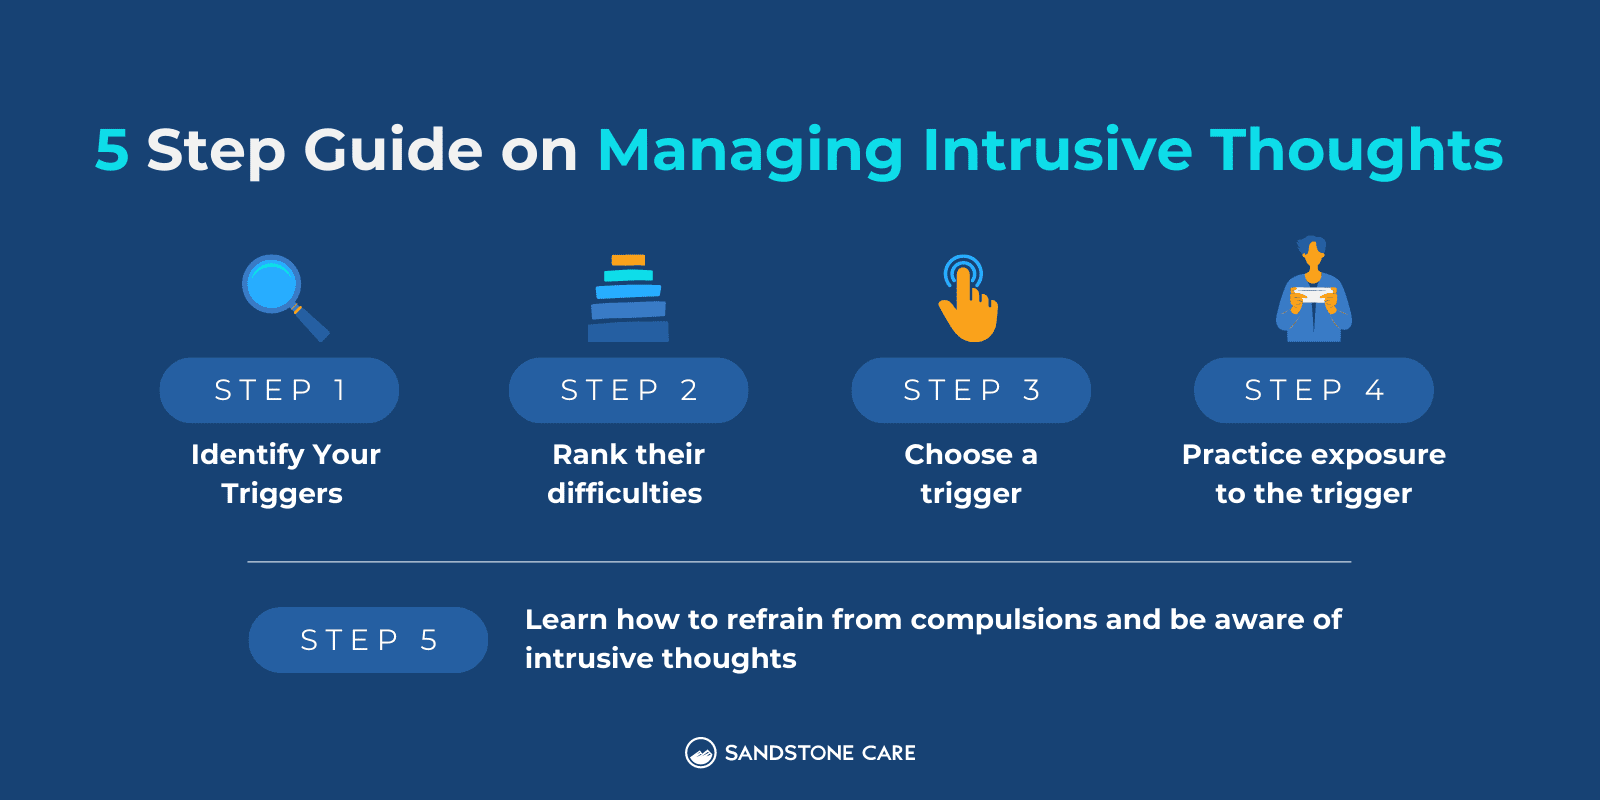 "5 Step Guide On Managing Intrusive Thoughts" written above 5 steps represented with a relevant illustration